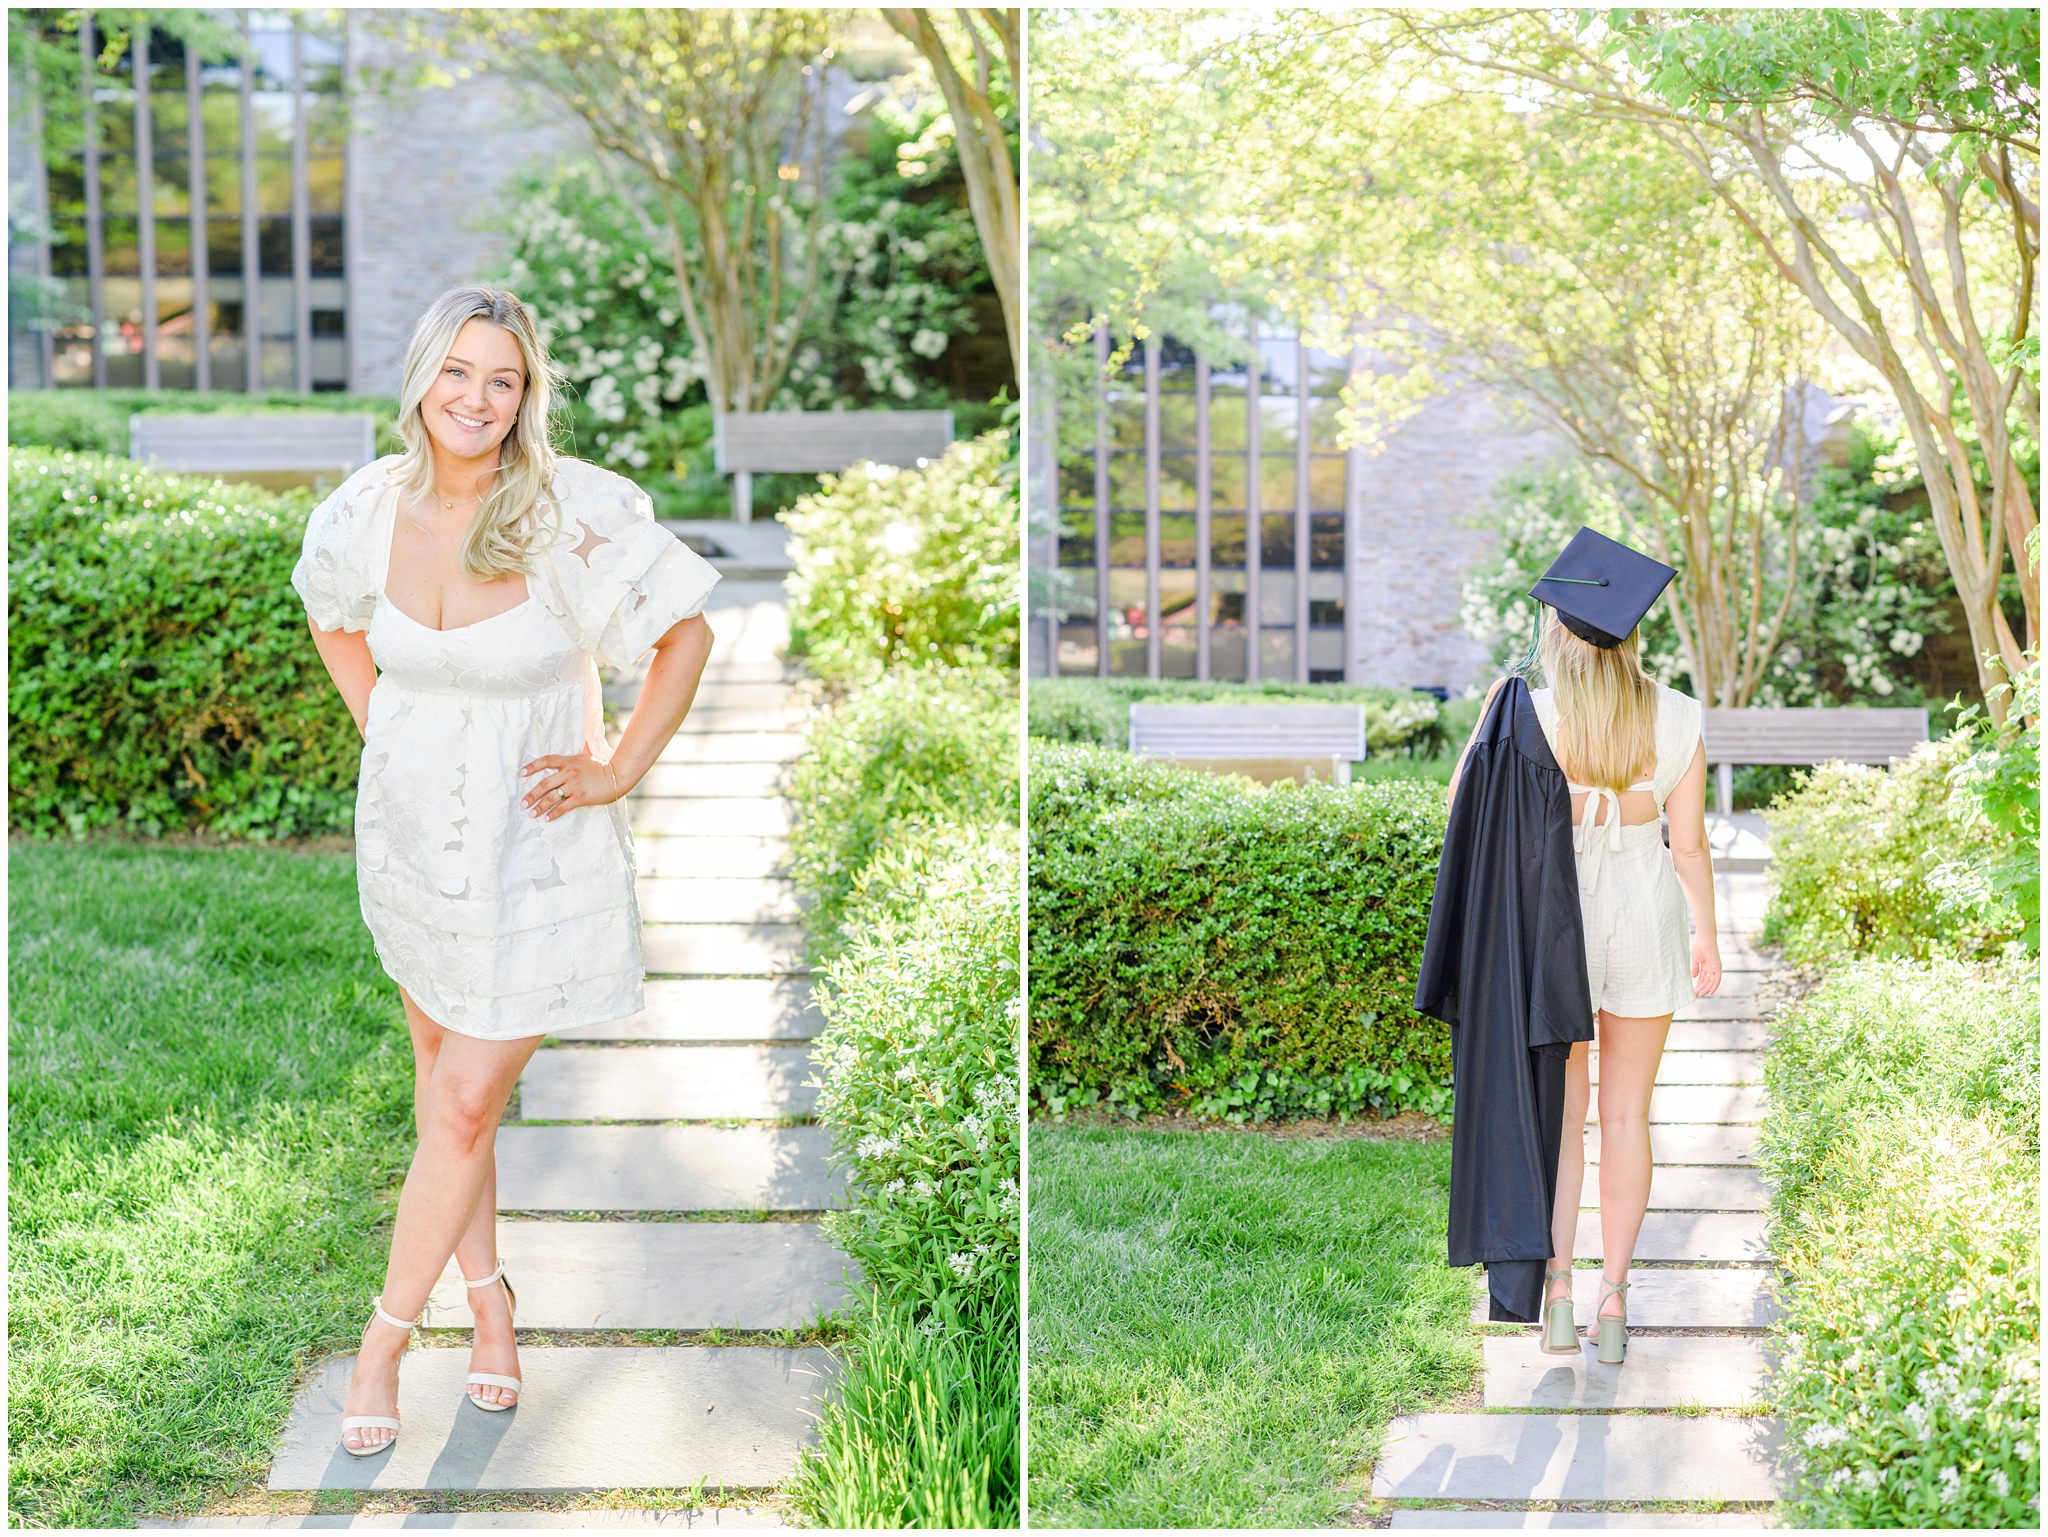 College graduate poses with her cap and gown in a garden photographed by Baltimore Photographer Cait Kramer